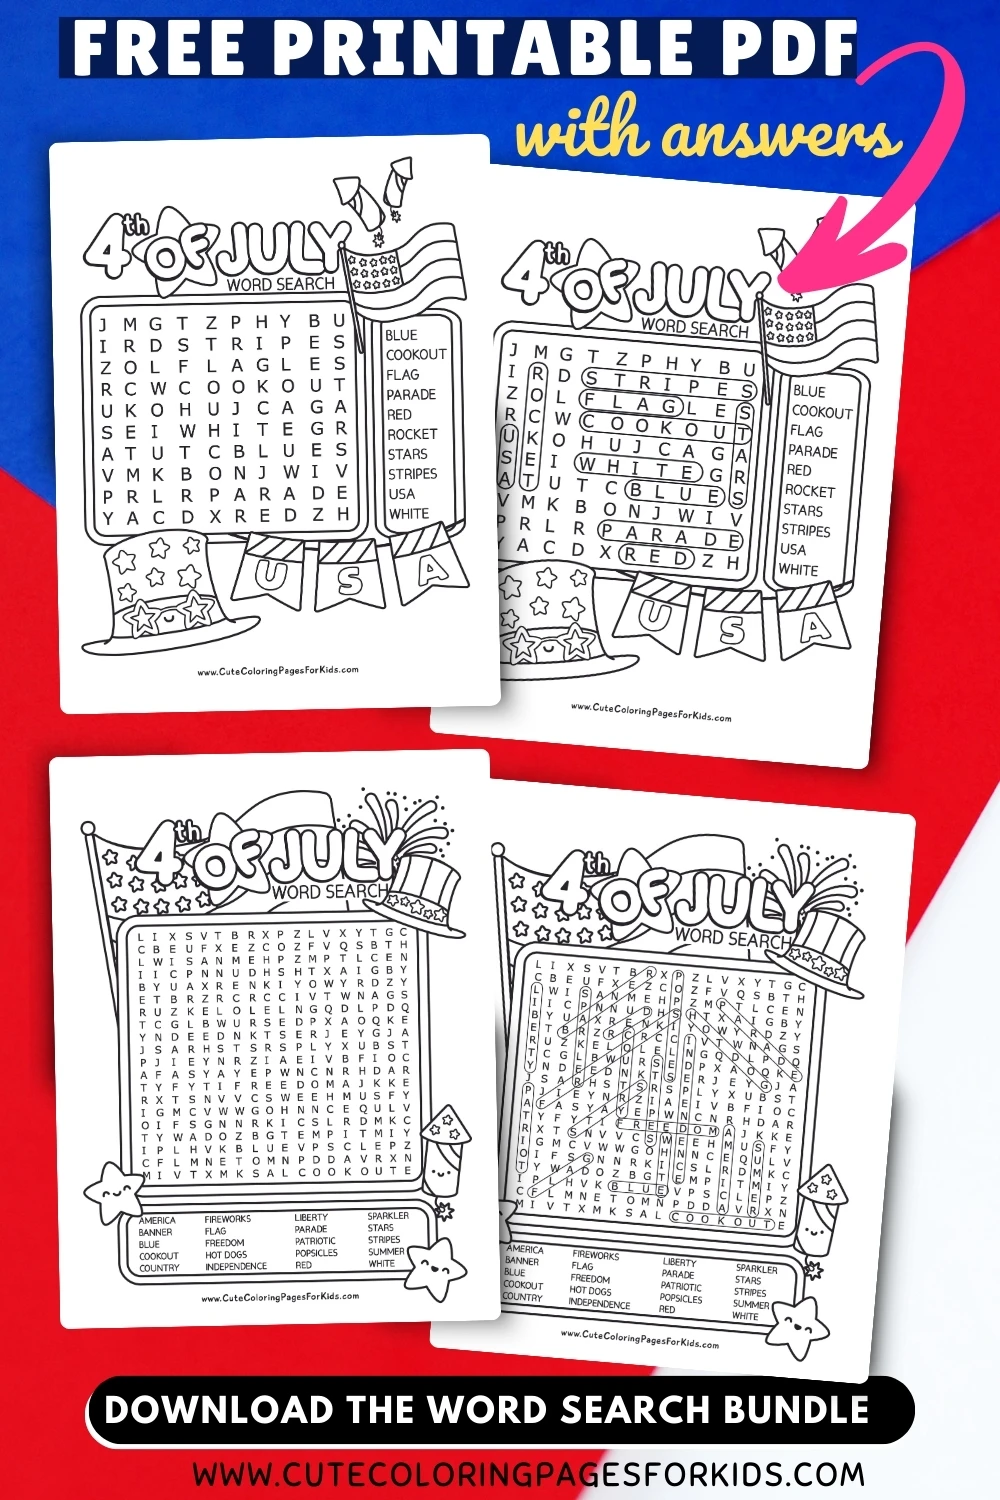 4 sheets of paper with word searches and answer sheets in 4th of July themes on a red, white, and blue background